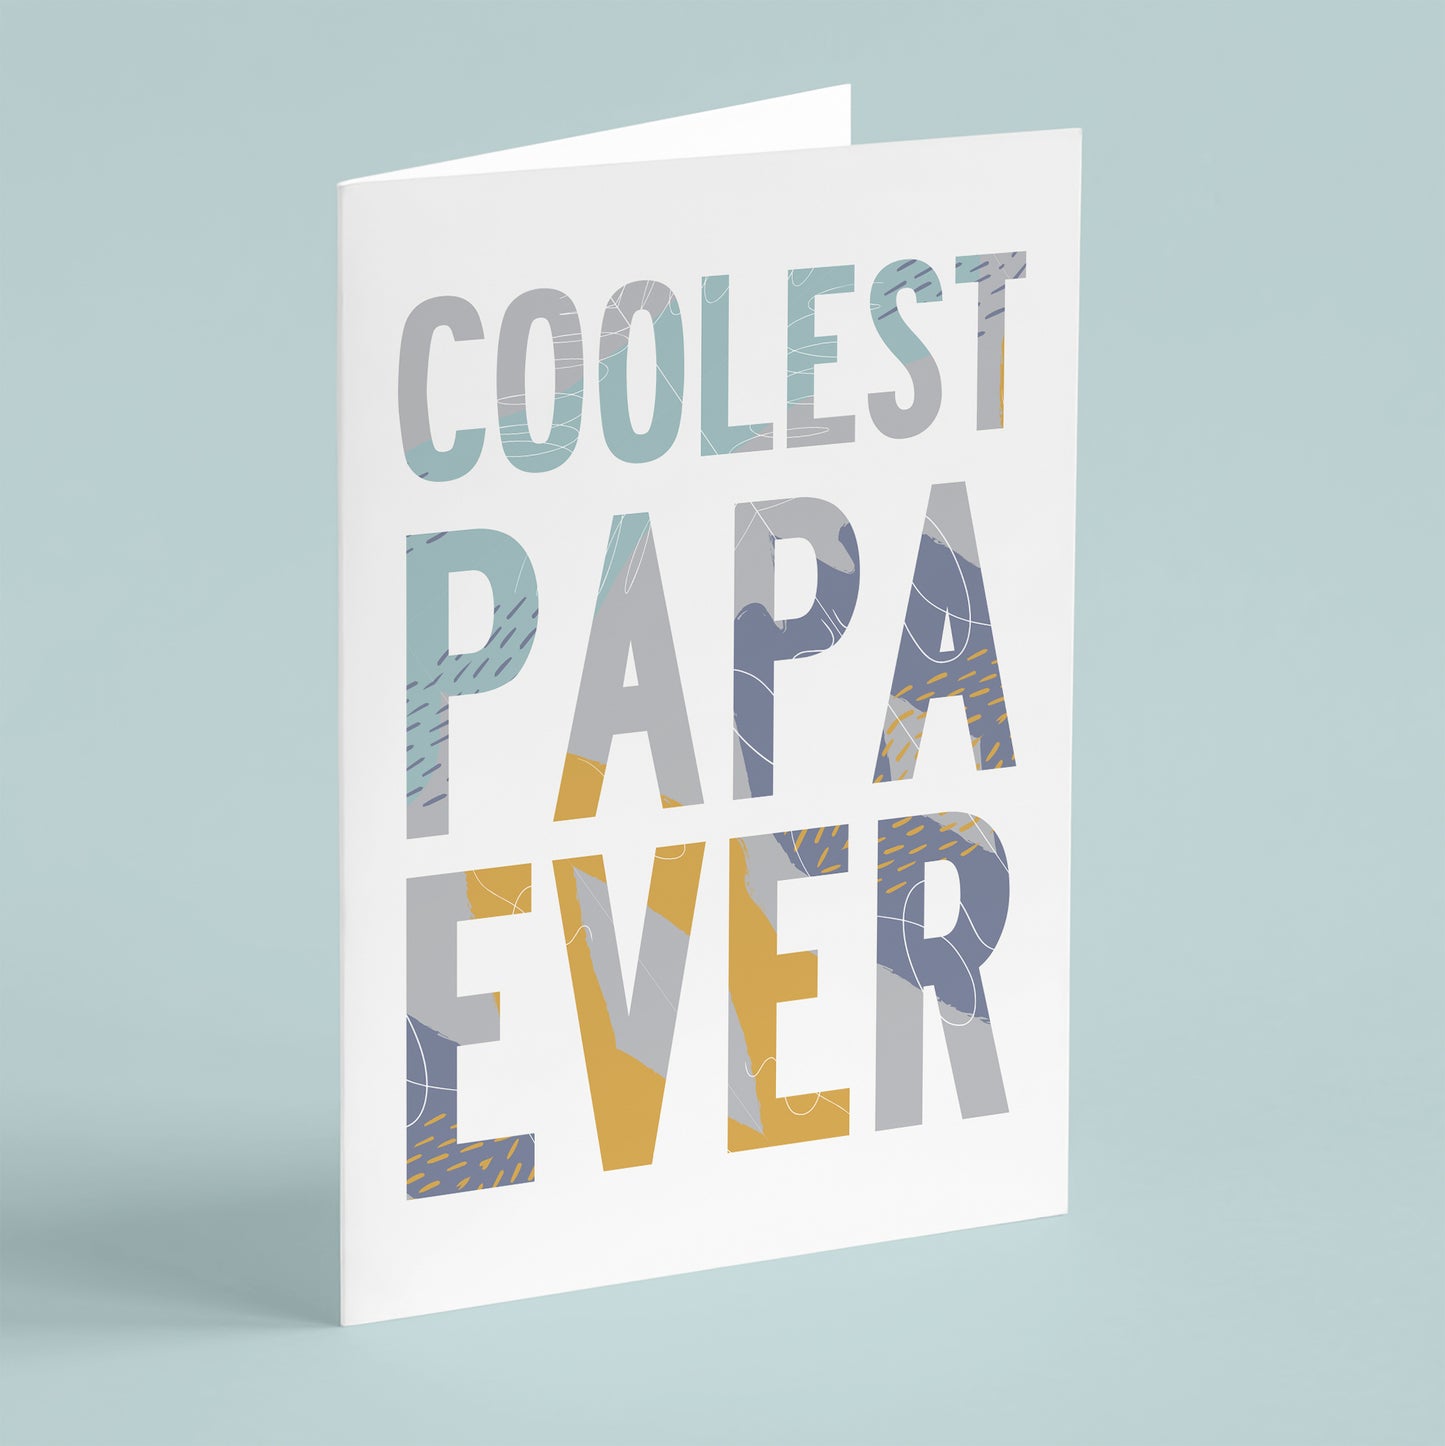 'Coolest Papa Ever' Card